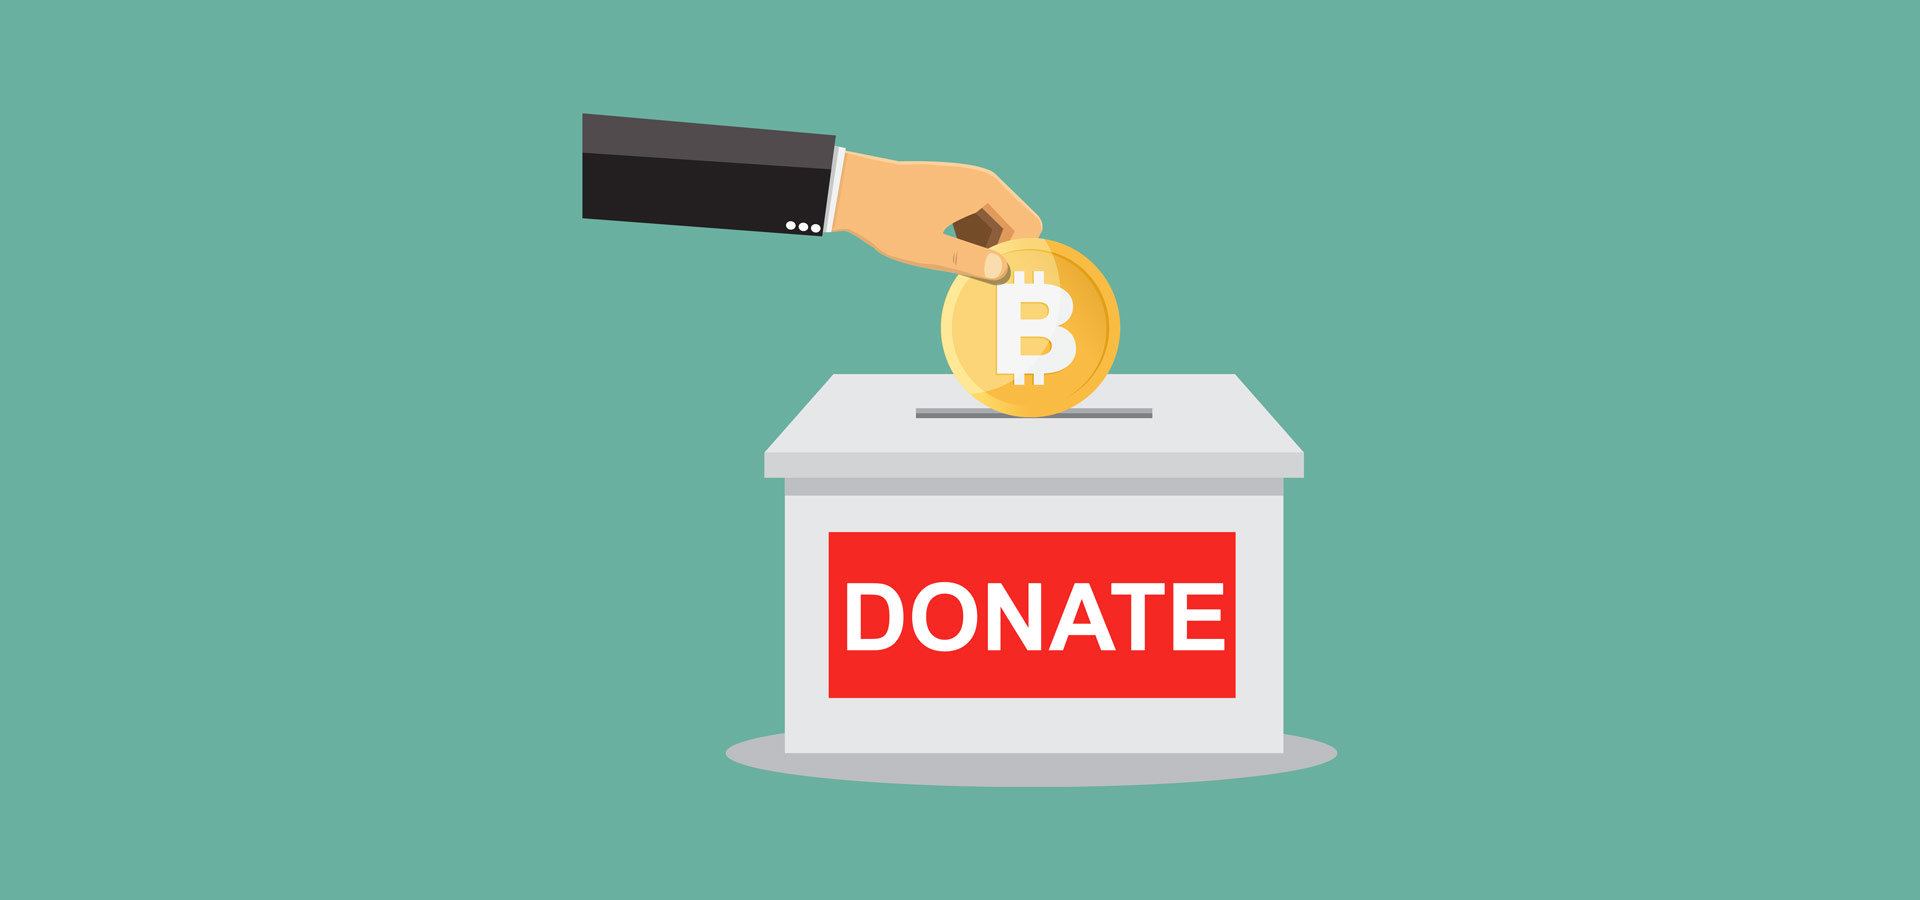 Accept cryptocurrency donations top 5 cryptocurrency to invest in 2018